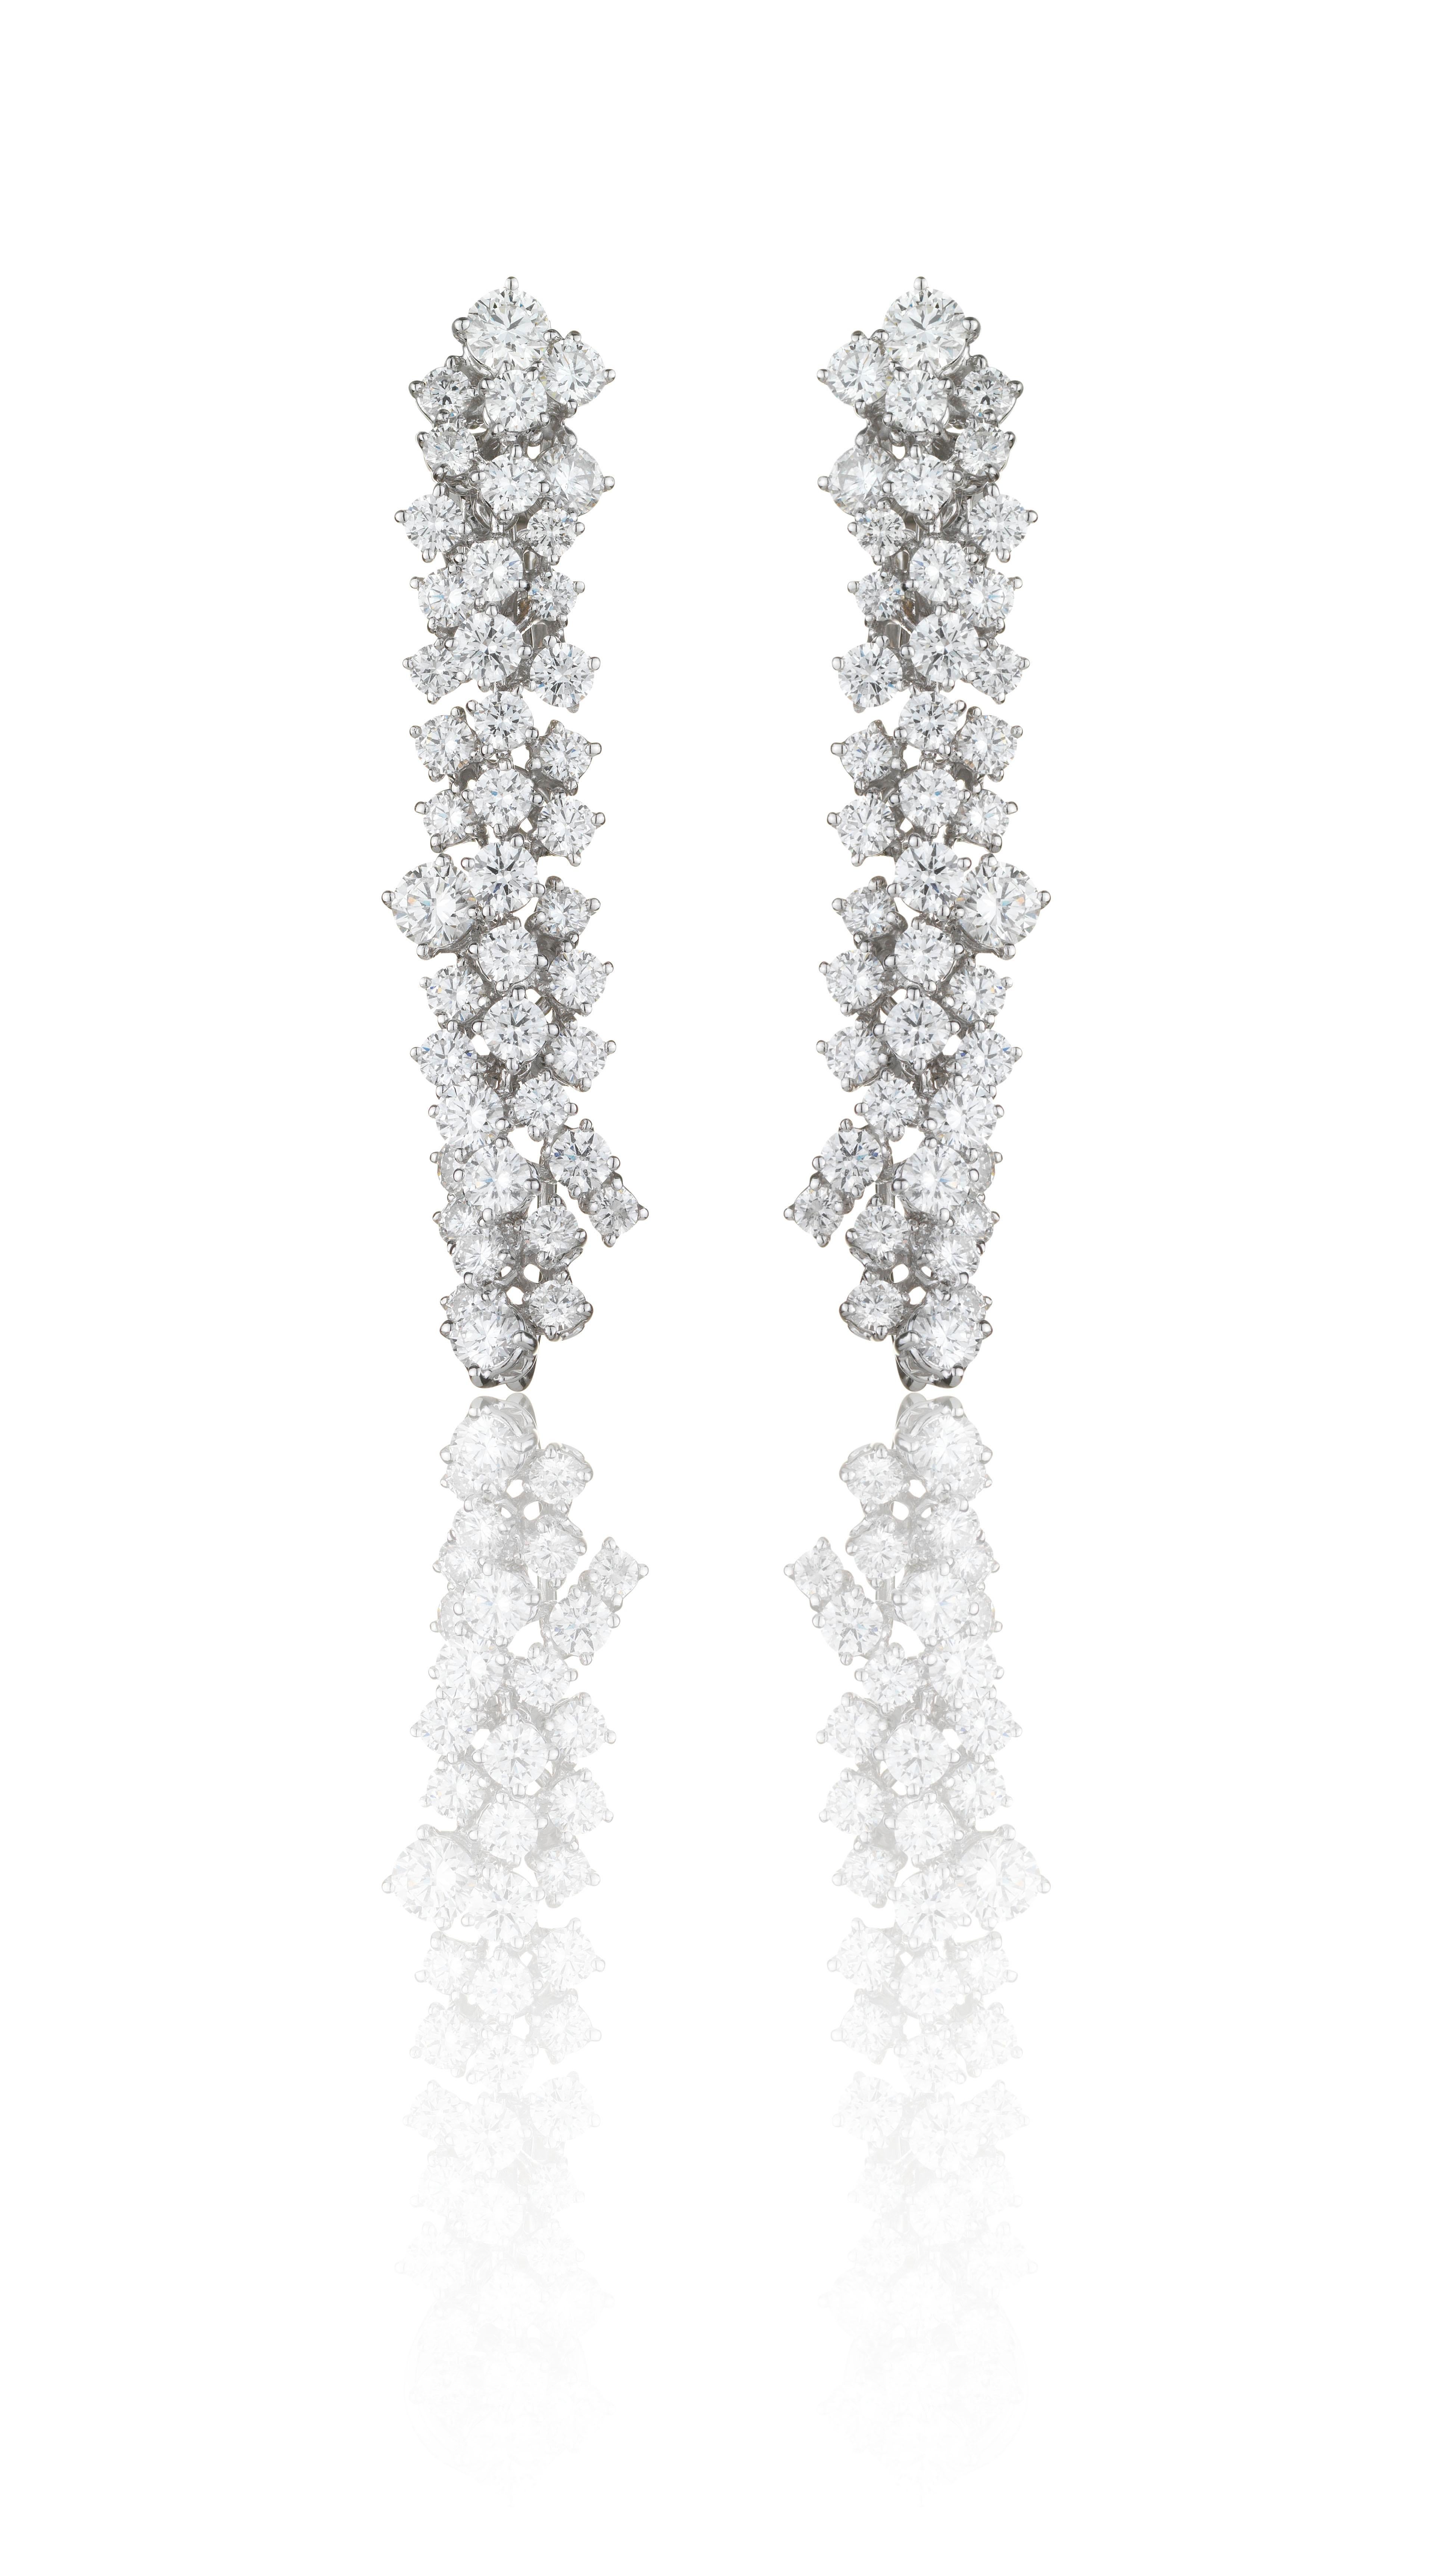 Cascading diamonds and pure white pearls create these breath-taking diamond and pearl drop earrings. An illuminating, flowing cluster of brilliant-cut white diamonds drop to hold a single, luminescent round South Sea pearl. The pearl is detachable